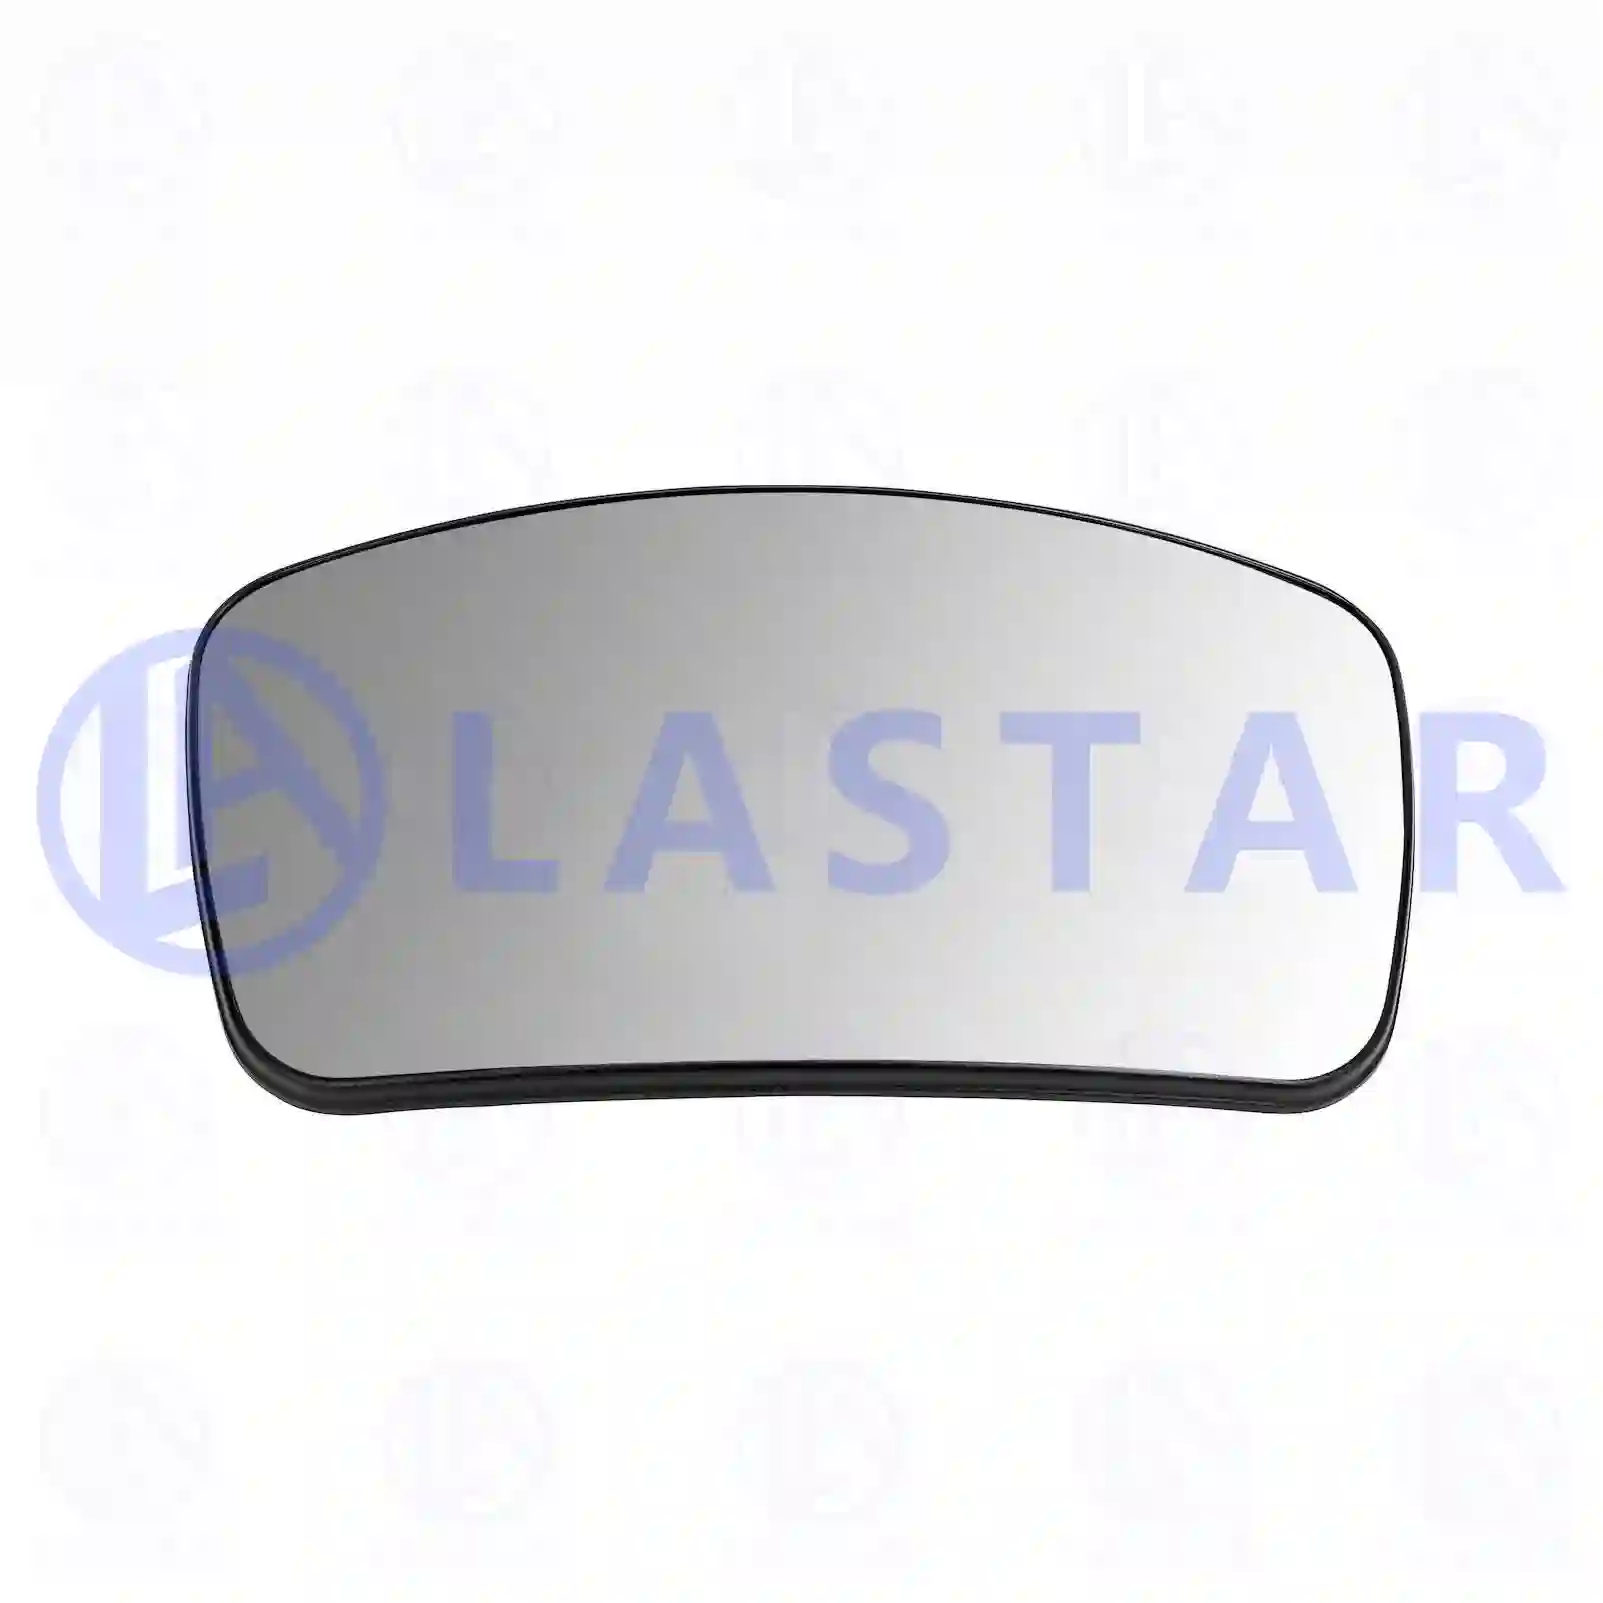 Mirror glass, kerb observation mirror, 77719004, 0028112233, ZG60981-0008 ||  77719004 Lastar Spare Part | Truck Spare Parts, Auotomotive Spare Parts Mirror glass, kerb observation mirror, 77719004, 0028112233, ZG60981-0008 ||  77719004 Lastar Spare Part | Truck Spare Parts, Auotomotive Spare Parts